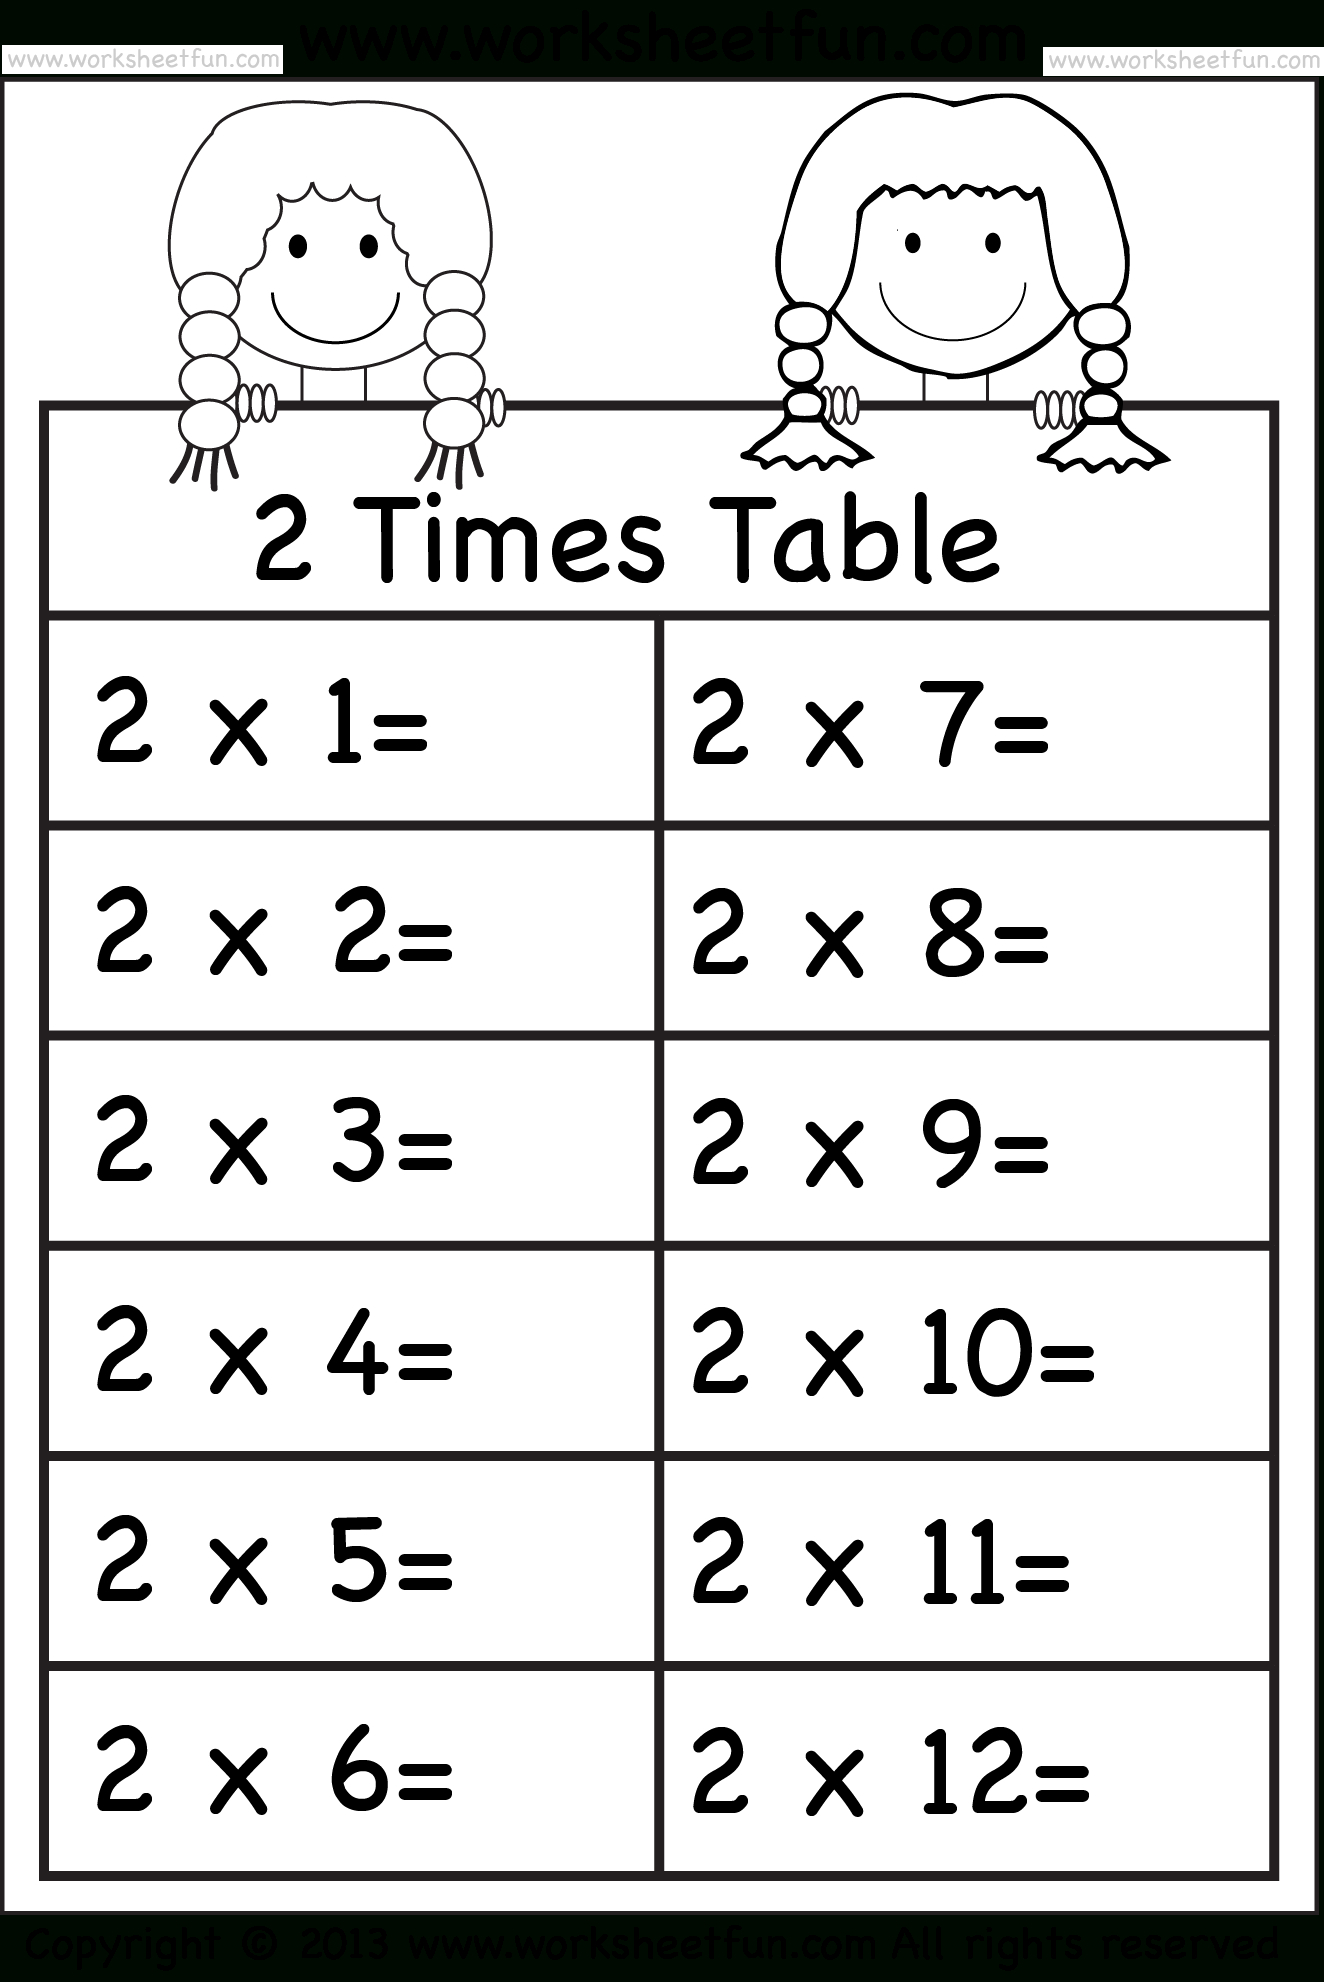 Times Tables Worksheets – 2, 3, 4, 5, 6, 7, 8, 9, 10, 11 And within Multiplication Worksheets 6 And 7 Times Tables